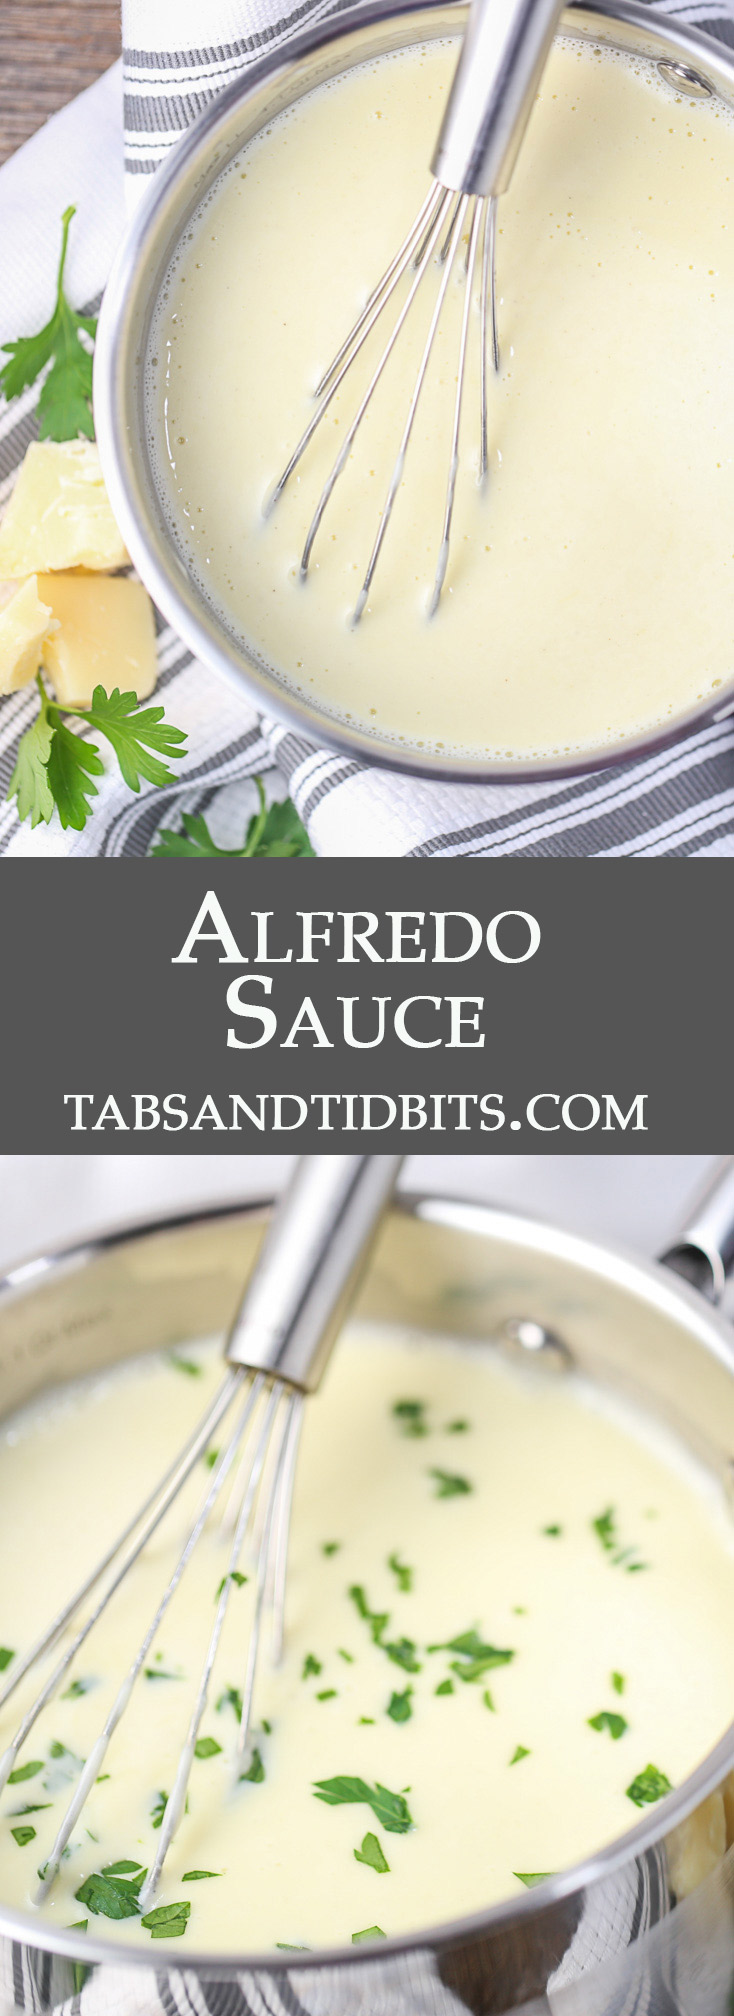 Simple and made freom scratch decadent alfredo sauce!